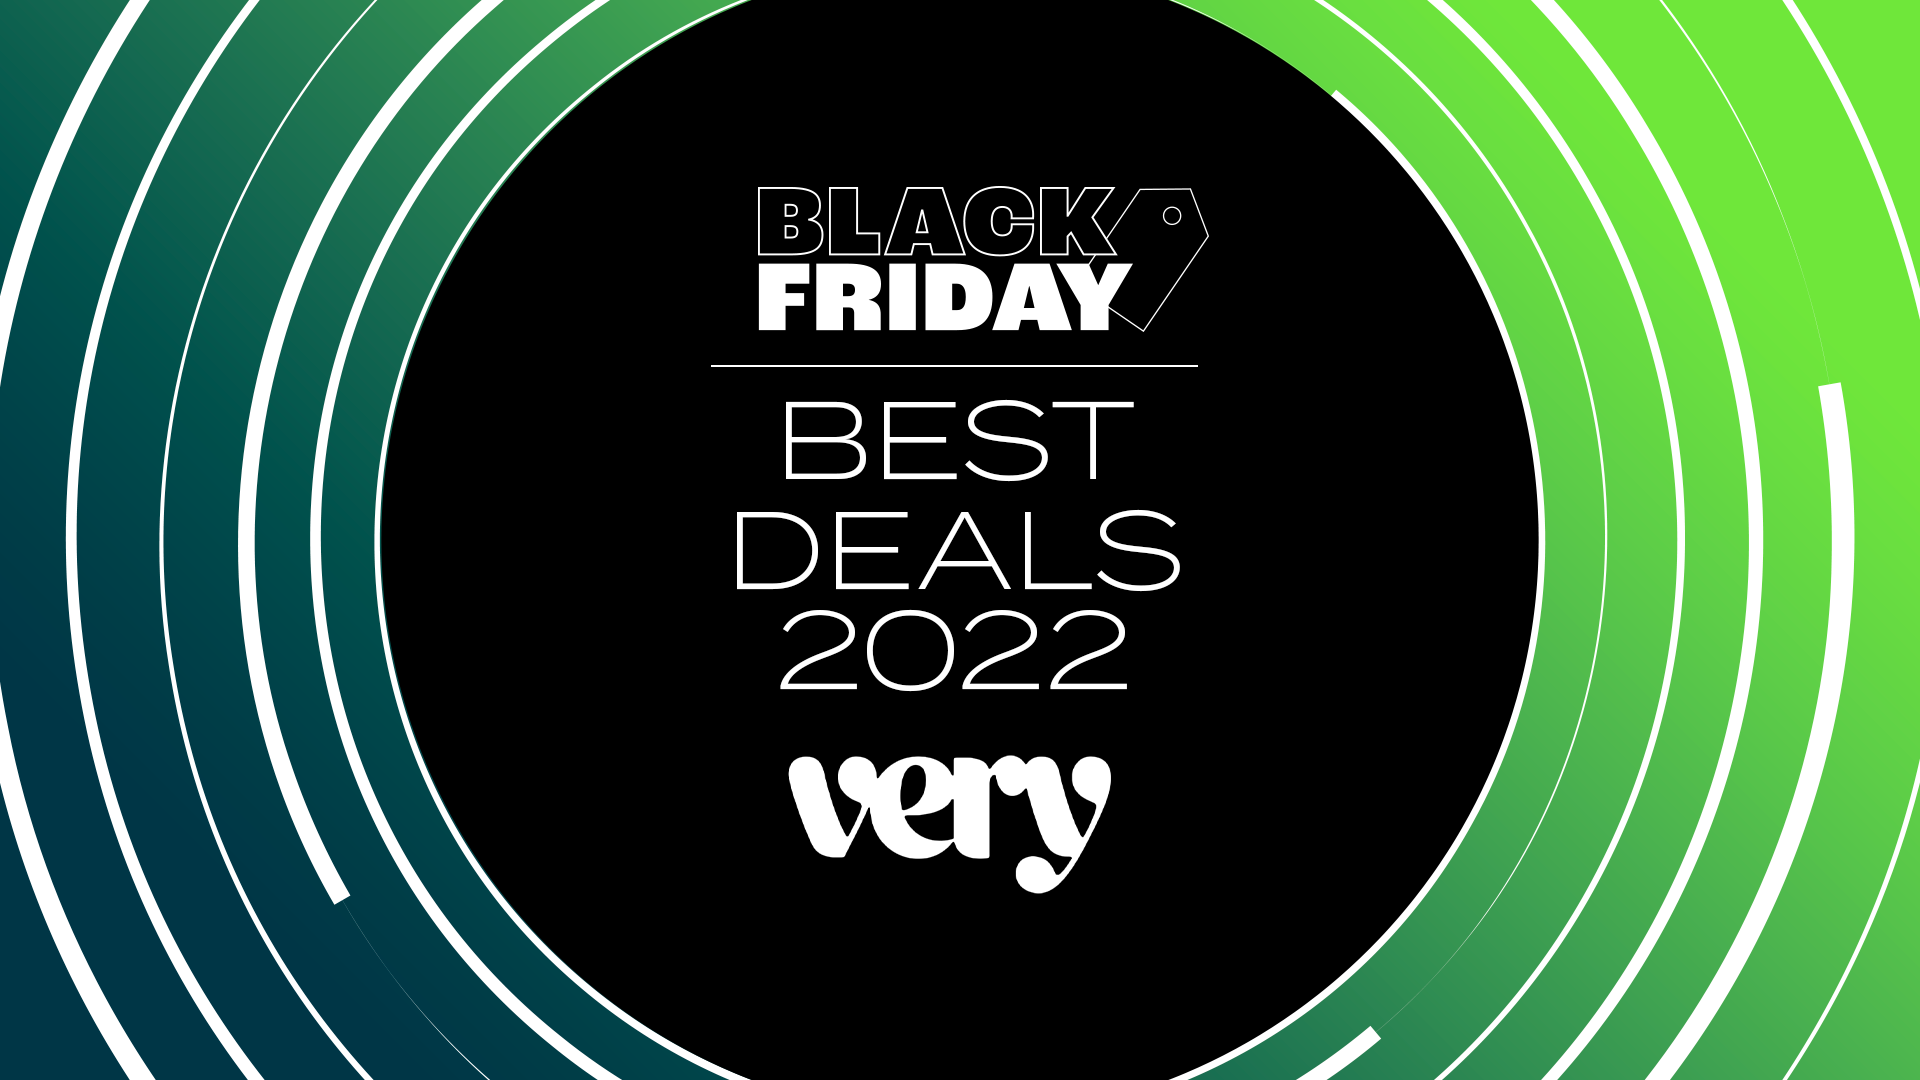 Image for Black Friday Very deals 2022 day three: best offers and discounts